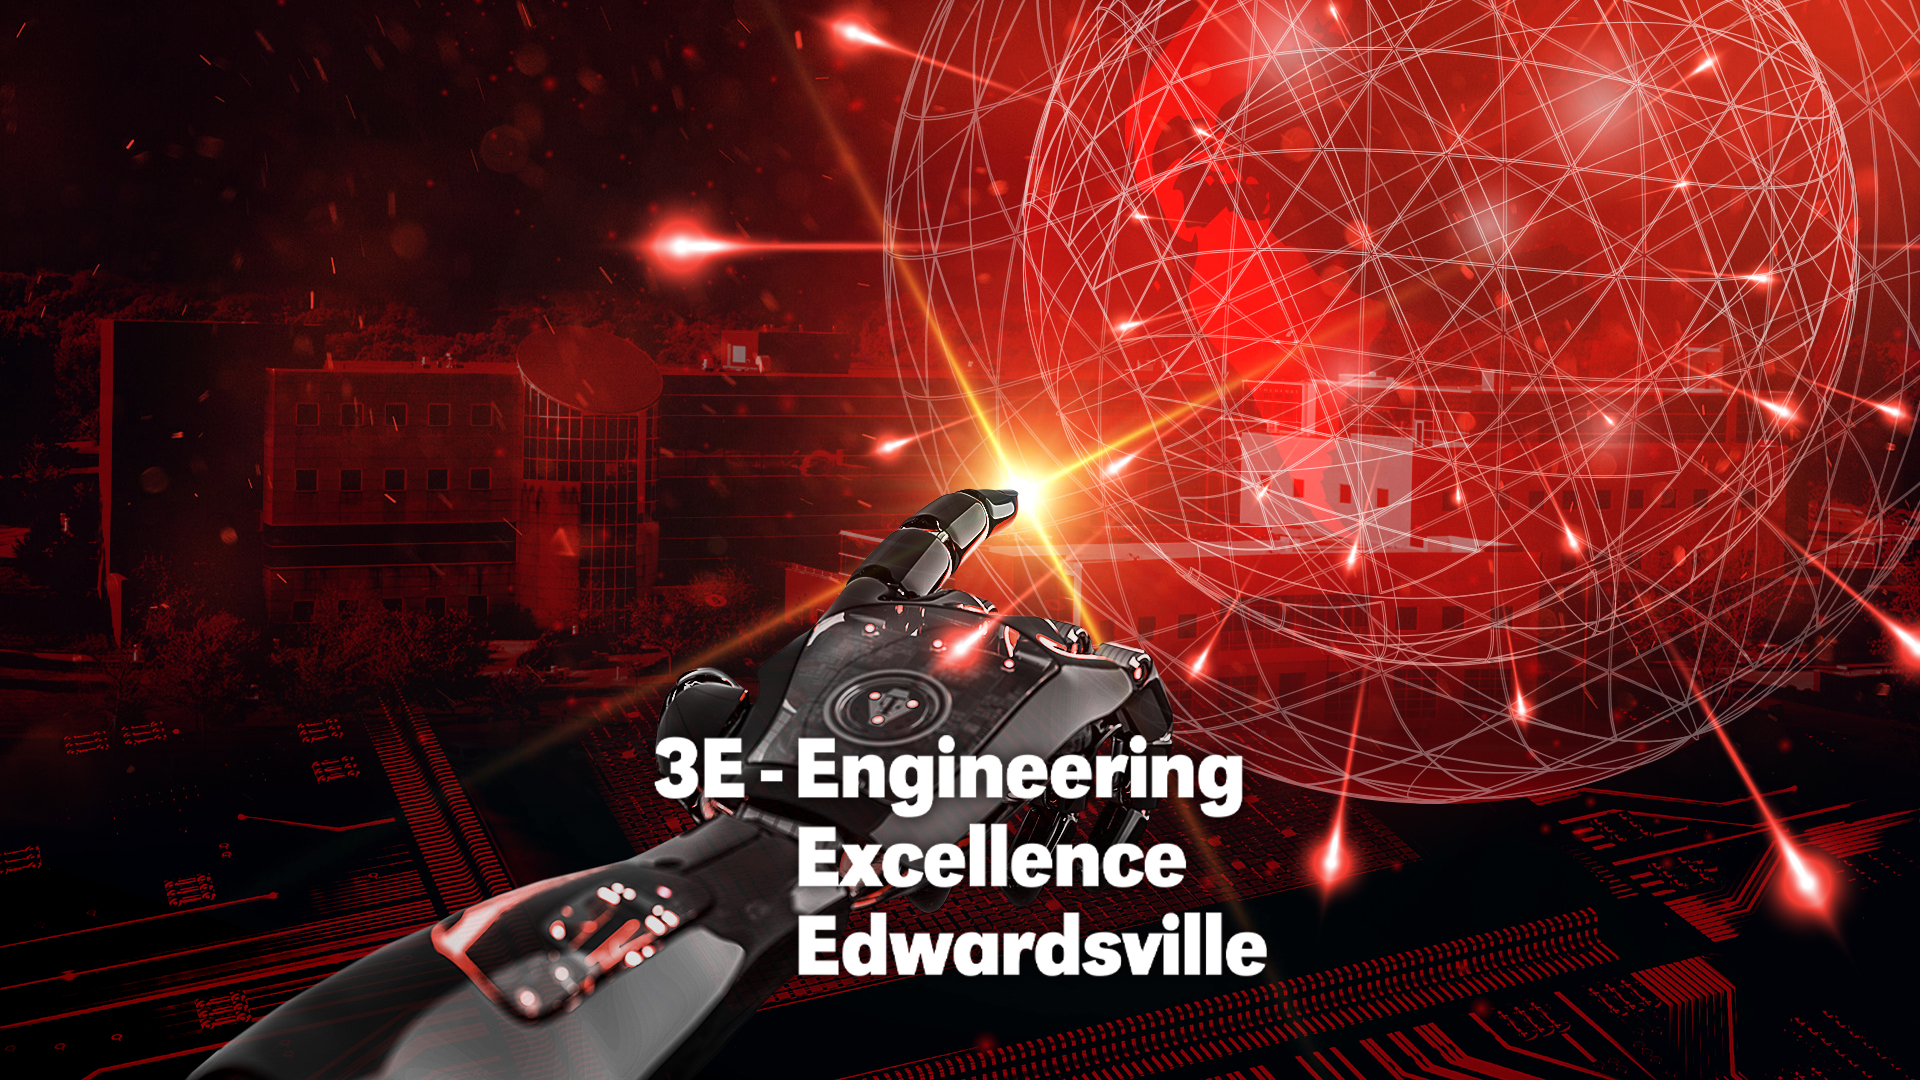 3E-Engineering, Excellence, Edwardsville